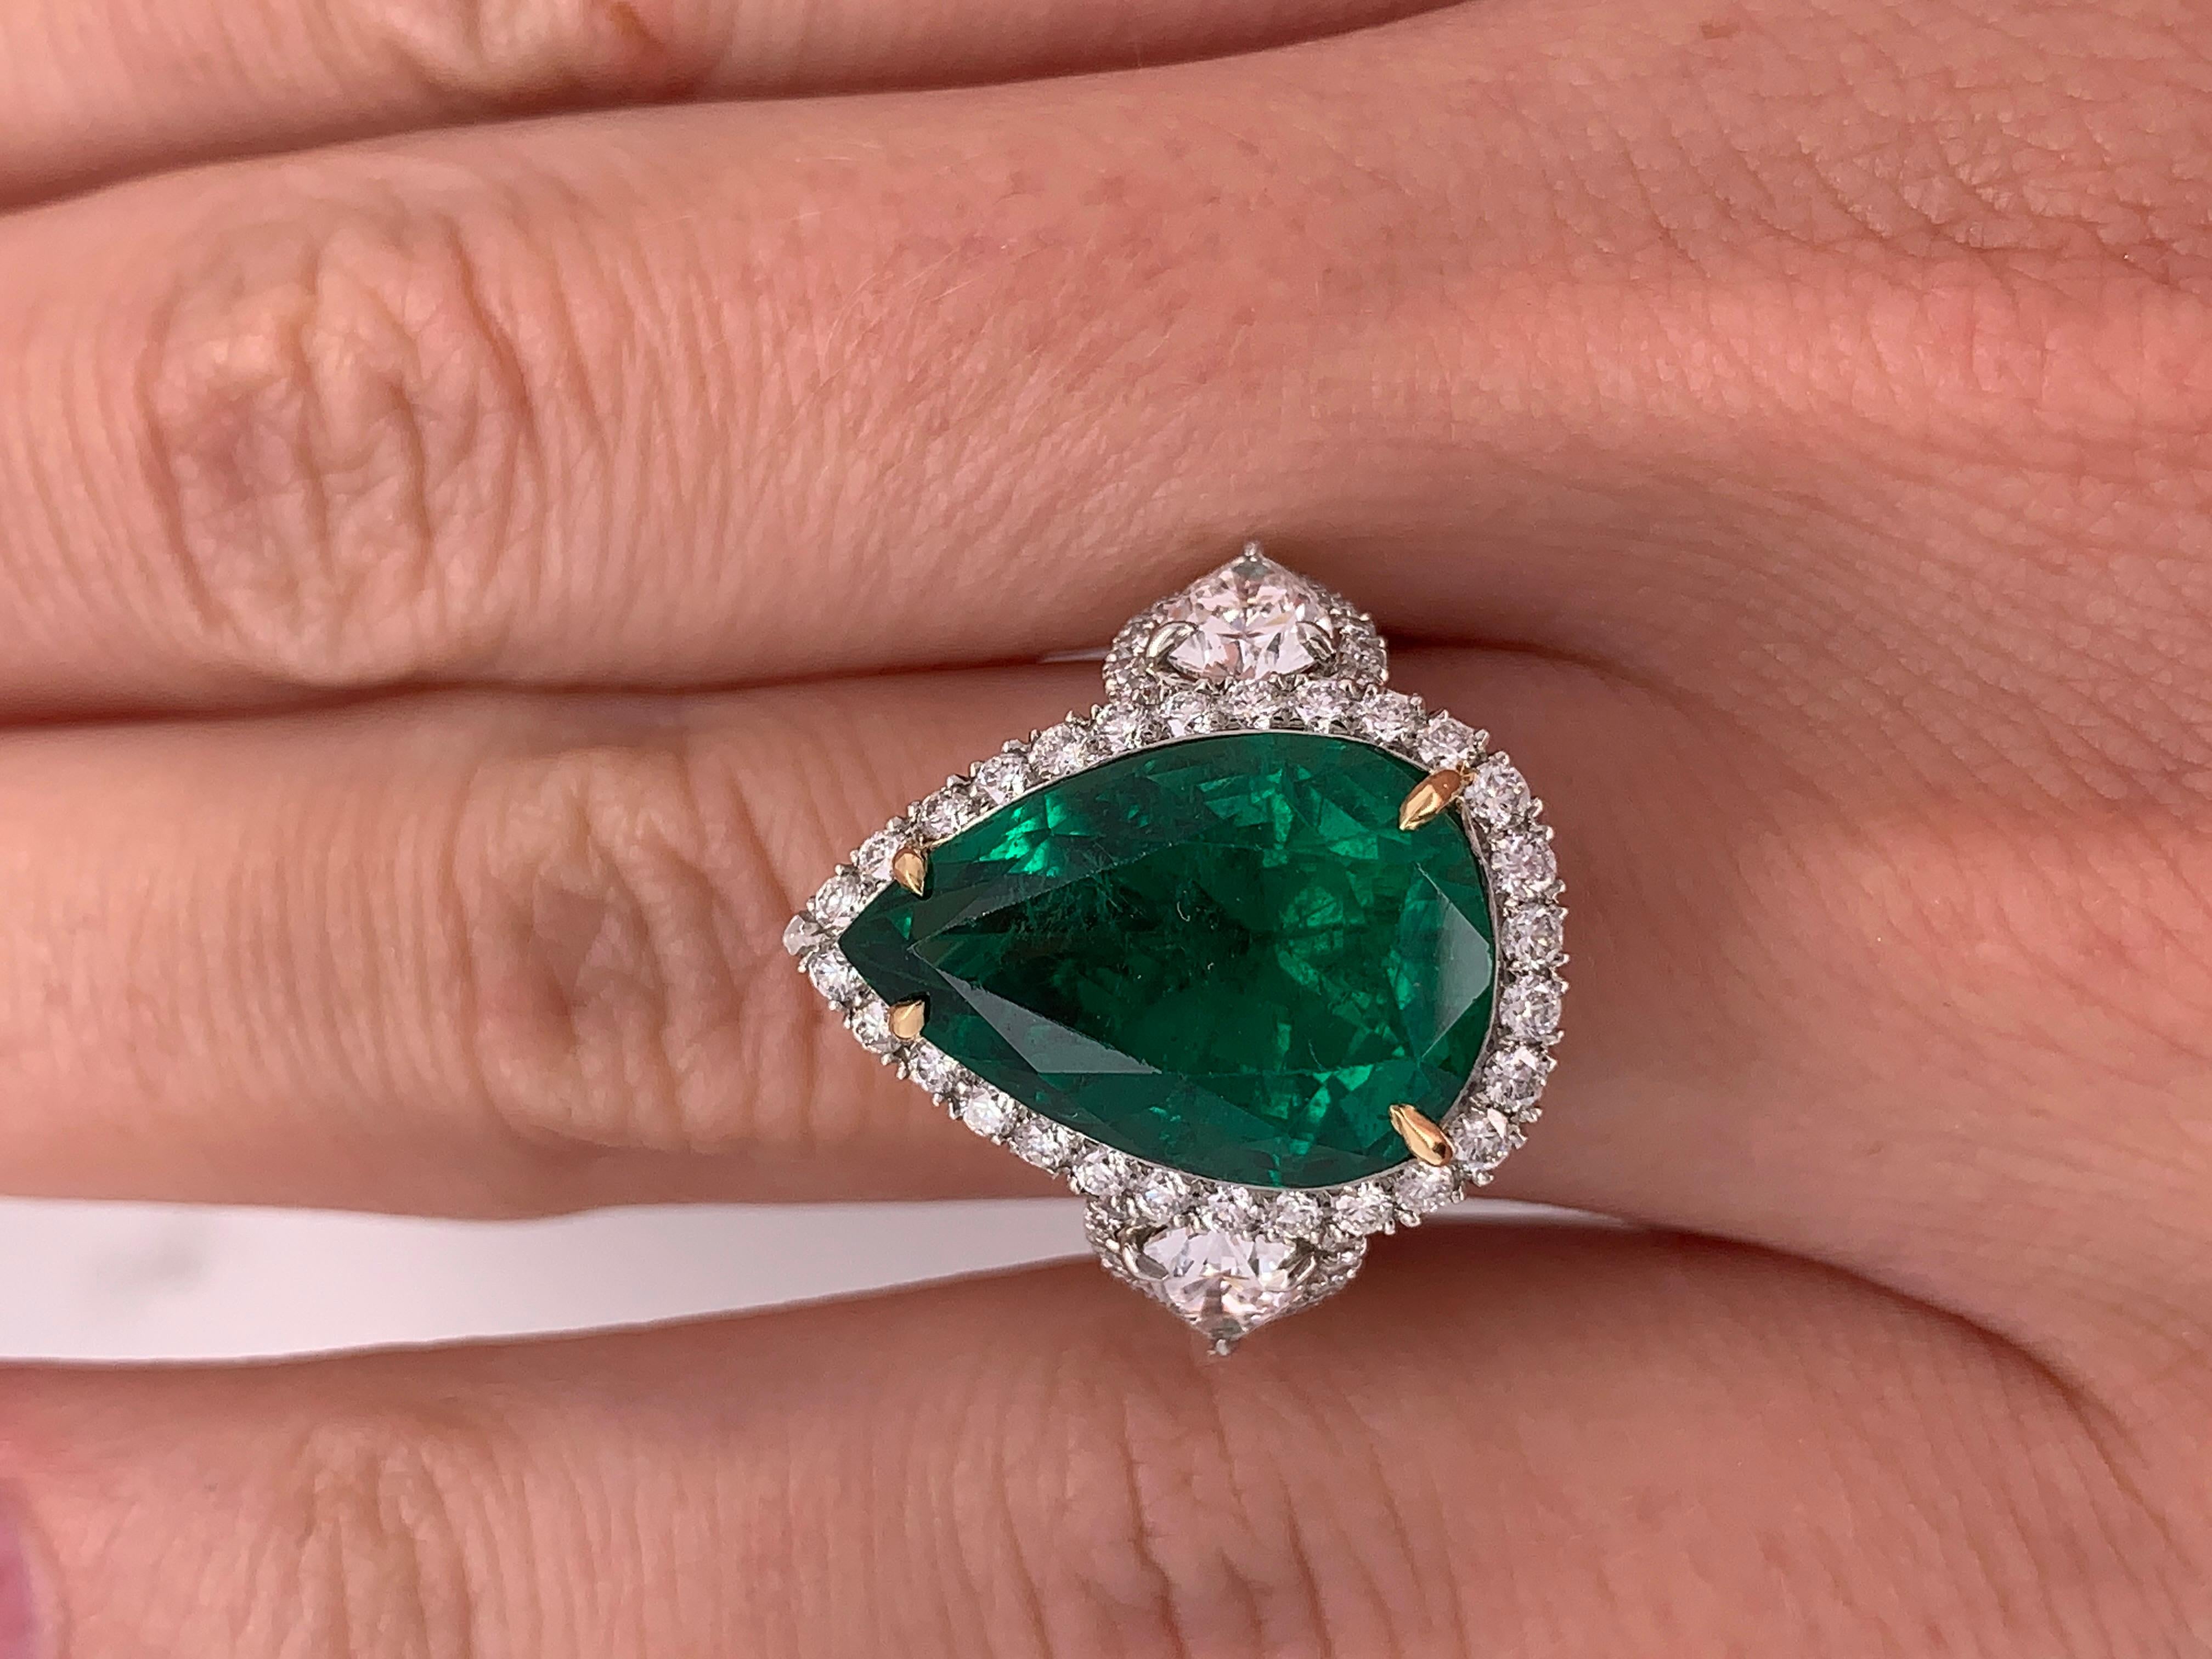 Emerald Cut GIA Certified 8.78 Carat Green Emerald Pear Shaped Platinum Ring with Diamonds For Sale